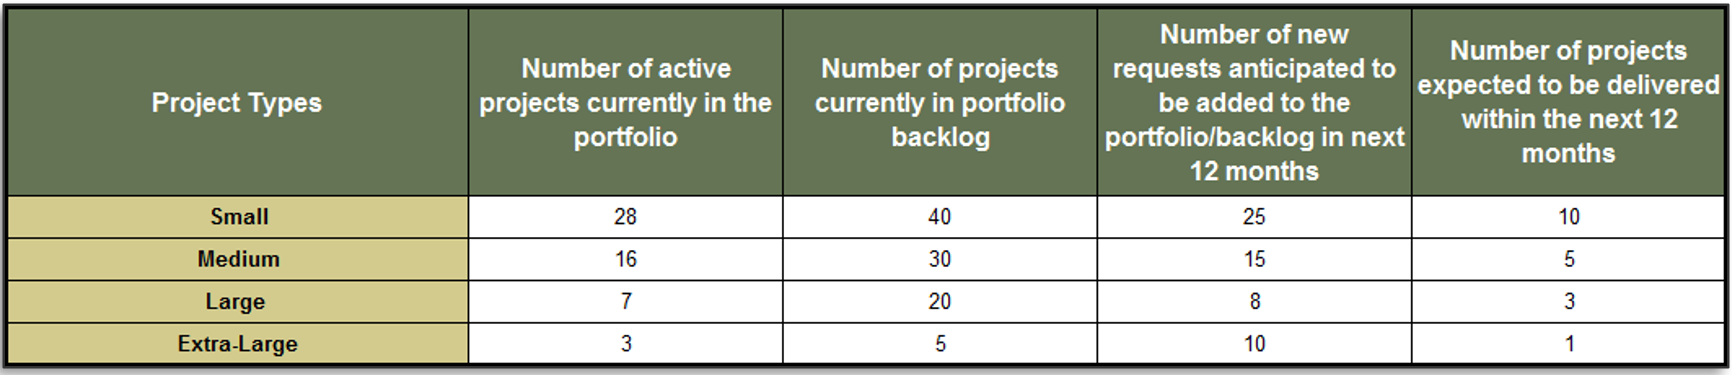 Screenshot of tab 4 in the PPM High-Level Supply/Demand Calculator. It has 5 columns labelled 'Project Types' with values Small to Extra-Large, 'Number of active projects currently in the portfolio', 'Number of projects currently in the portfolio backlog', 'Number of new requests anticipated to be added to the portfolio/backlog in the next 12 months', and 'Number of projects expected to be delivered within the next 12 months'.